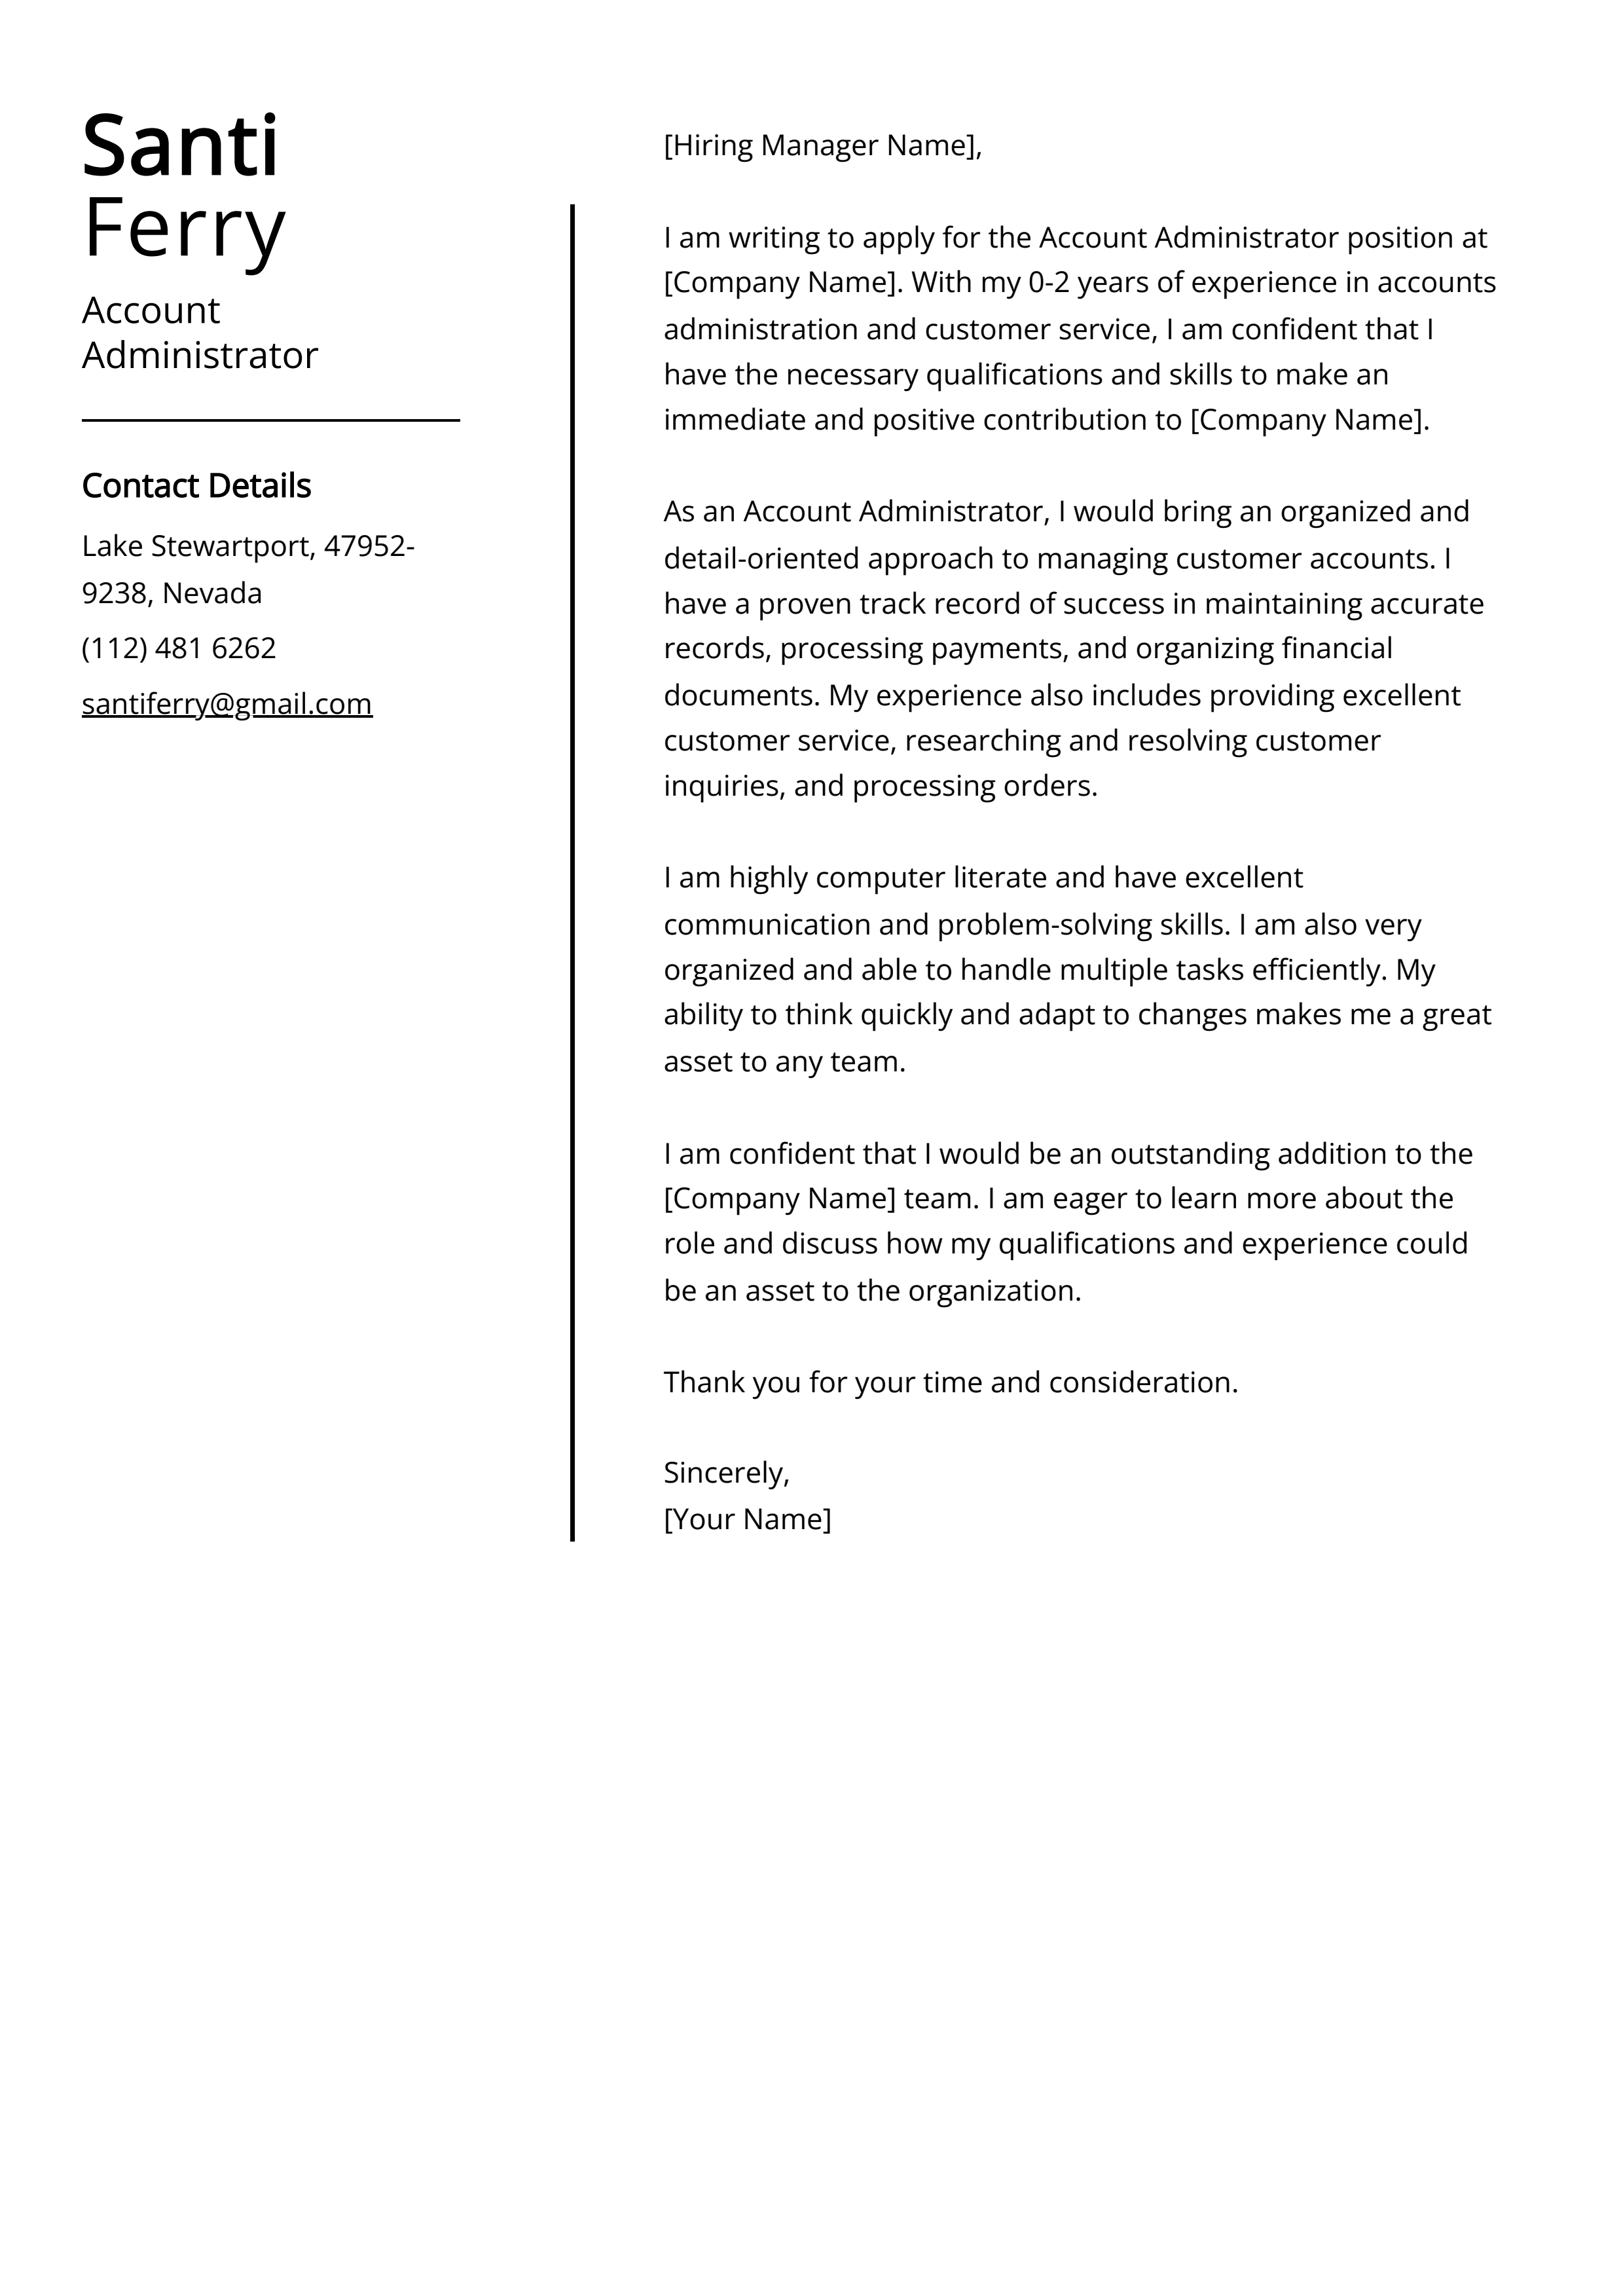 Account Administrator Cover Letter Example